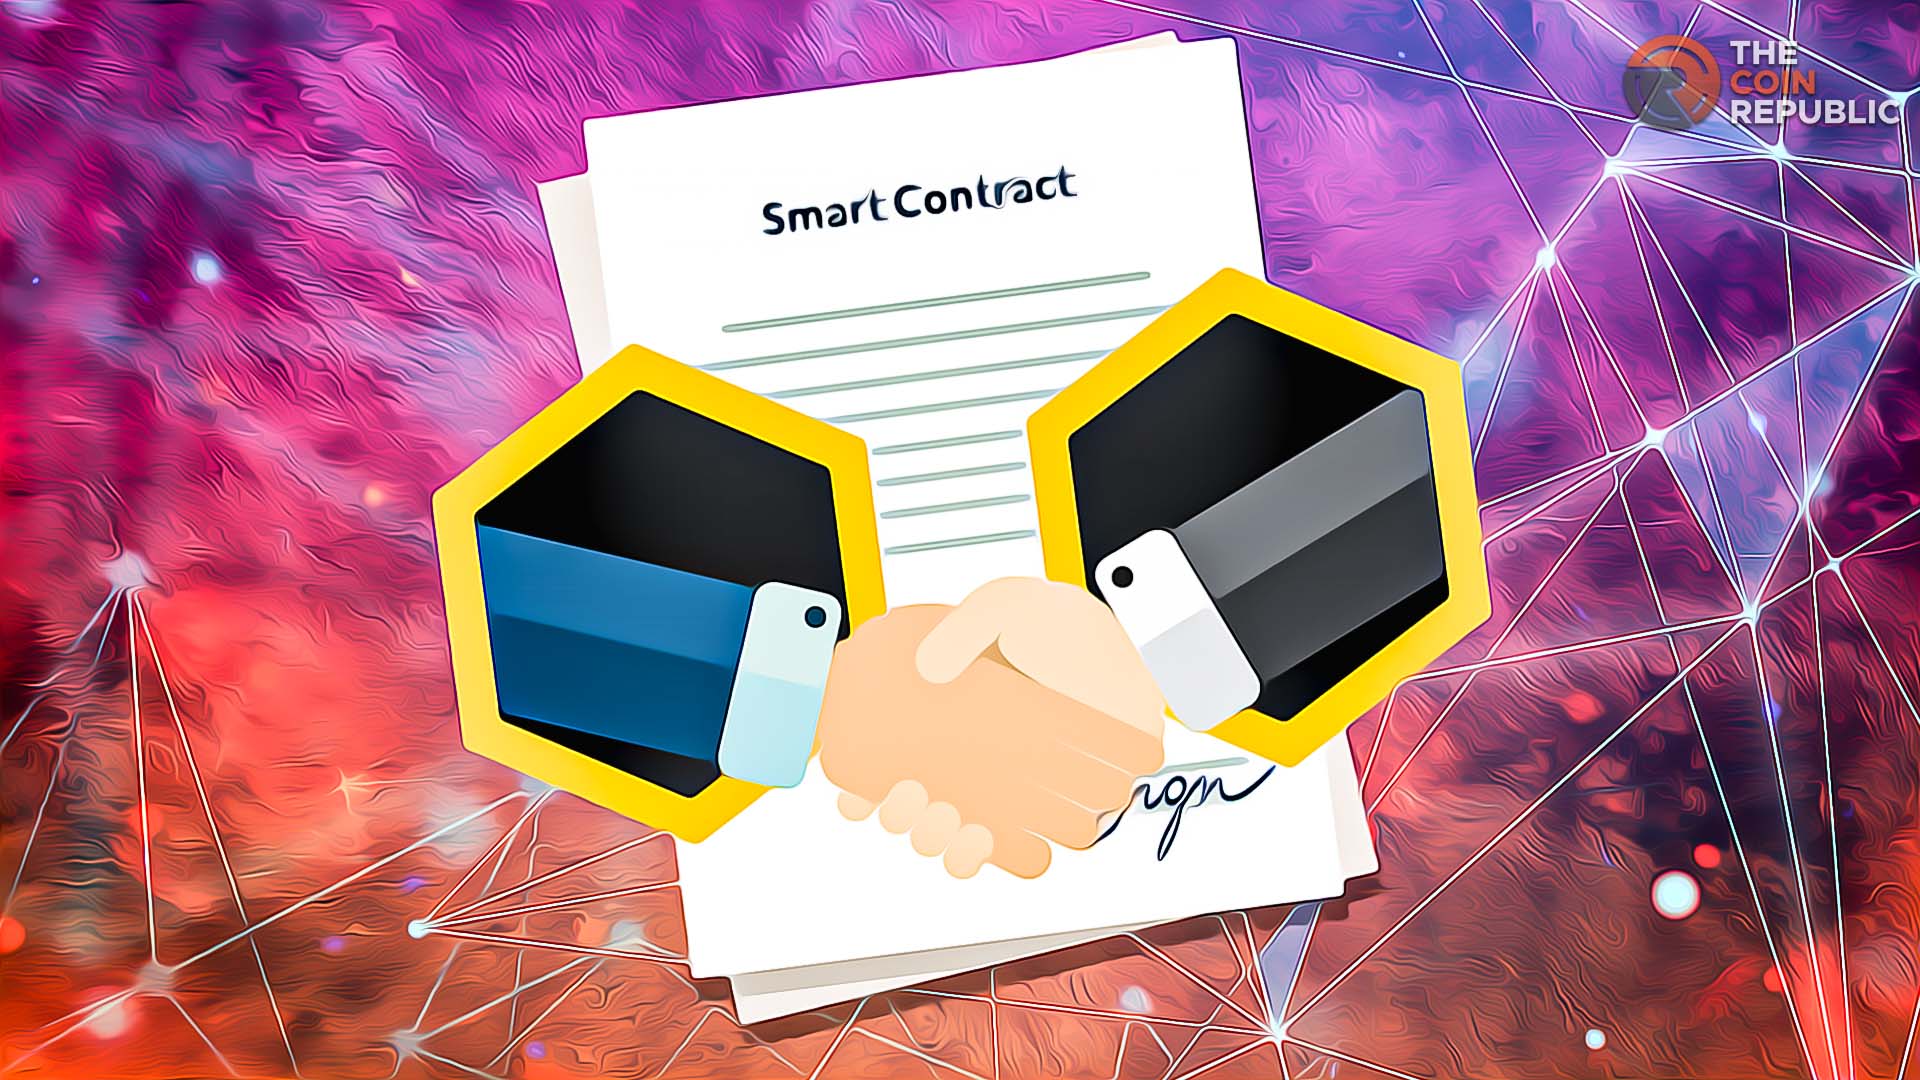 Smart Contracts: Here Are Some Real-Life Applications of These